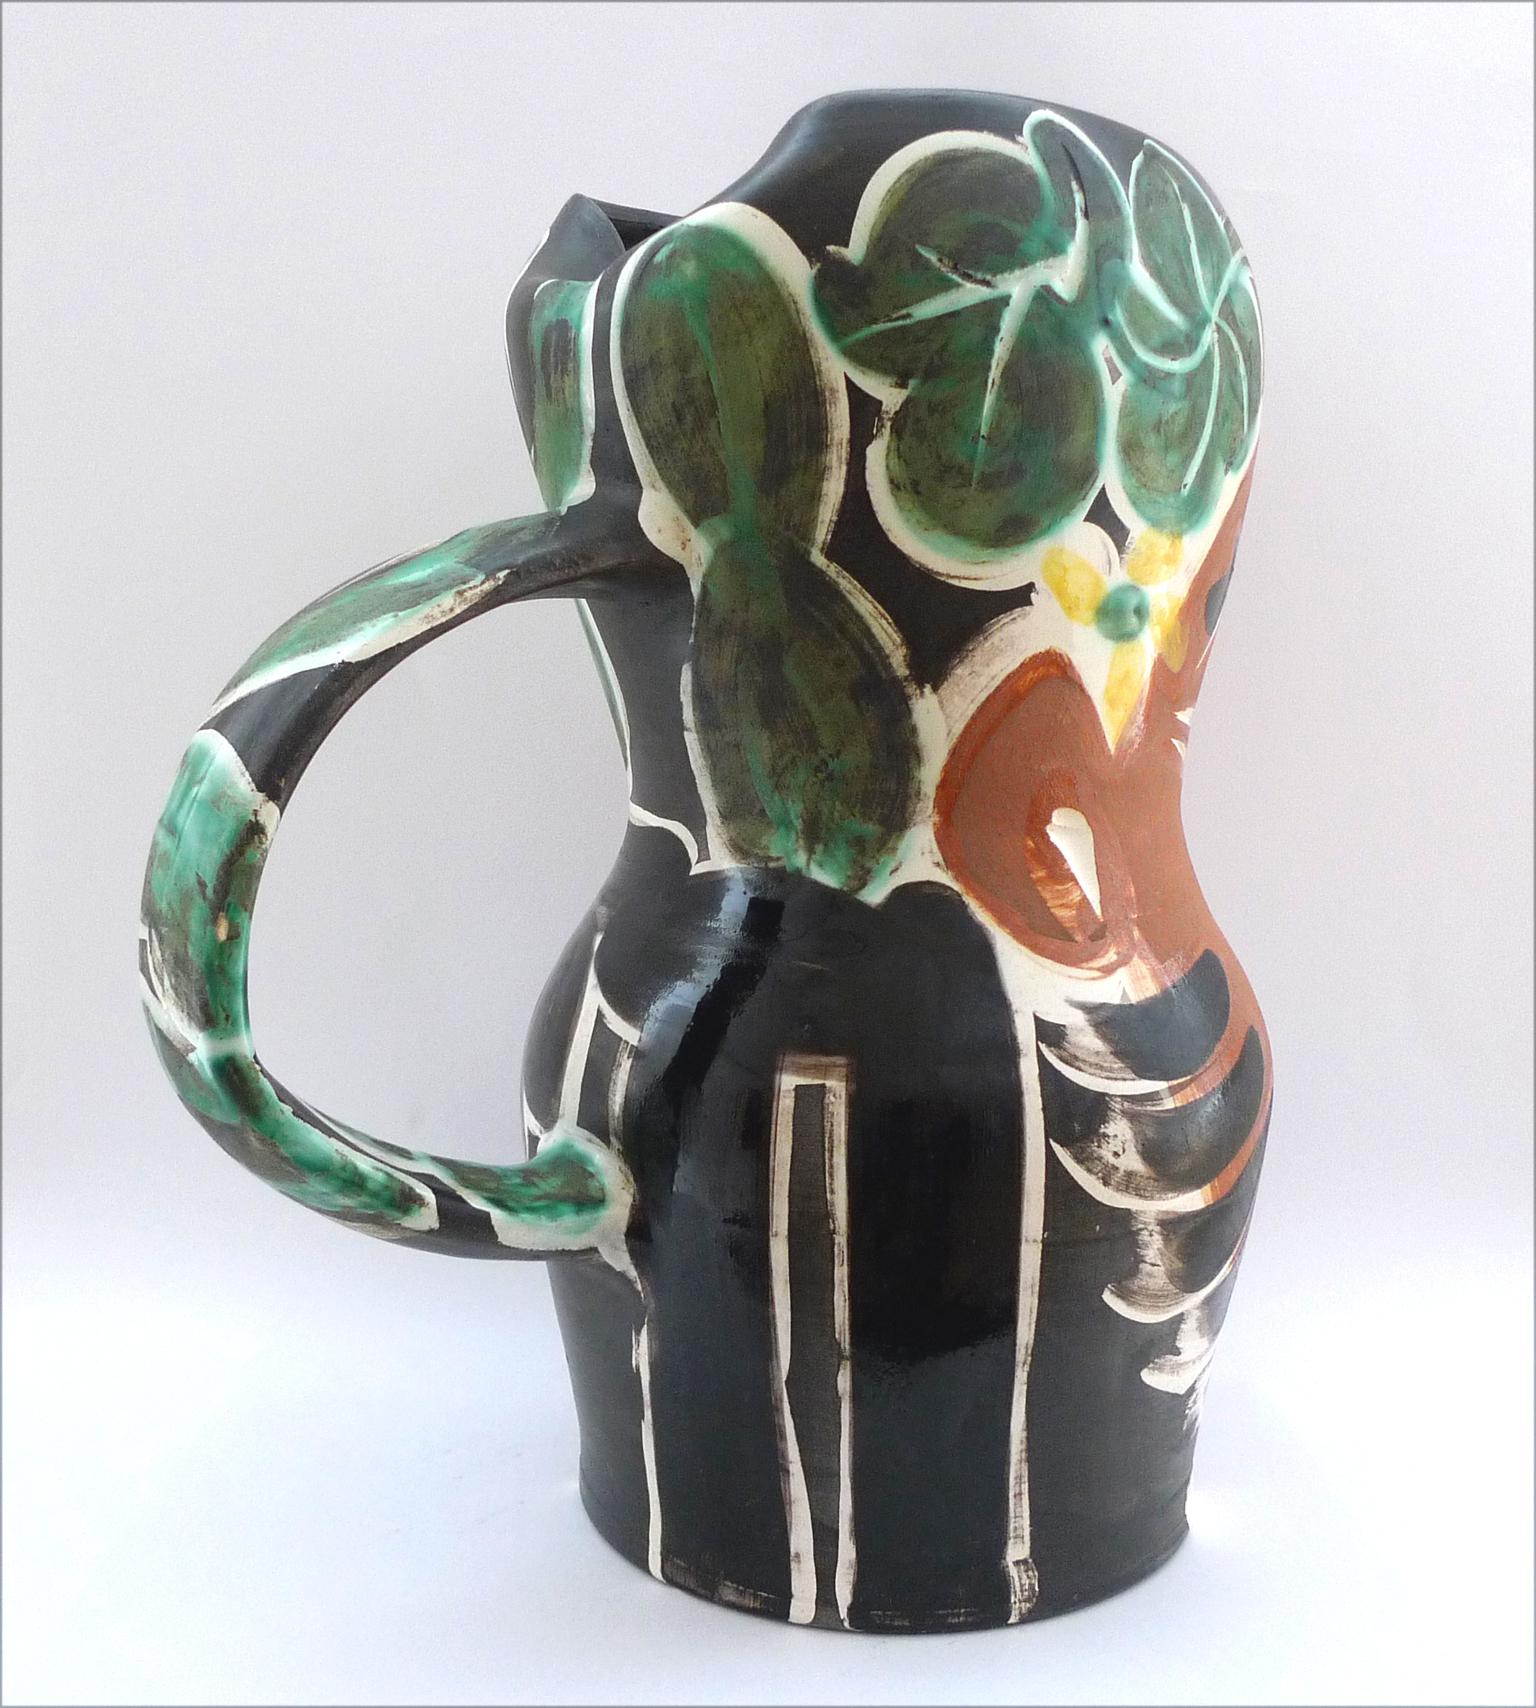 PABLO PICASSO (1881-1973)
LE BARBU (A.R. 217)
stamped and marked 'Edition Picasso/Madoura Plein Feu/Edition Picasso/Madoura' (underneath)
white earthenware ceramic pitcher, partially engraved, with colored engobe and glaze
Height: 12¾ in. (31.5